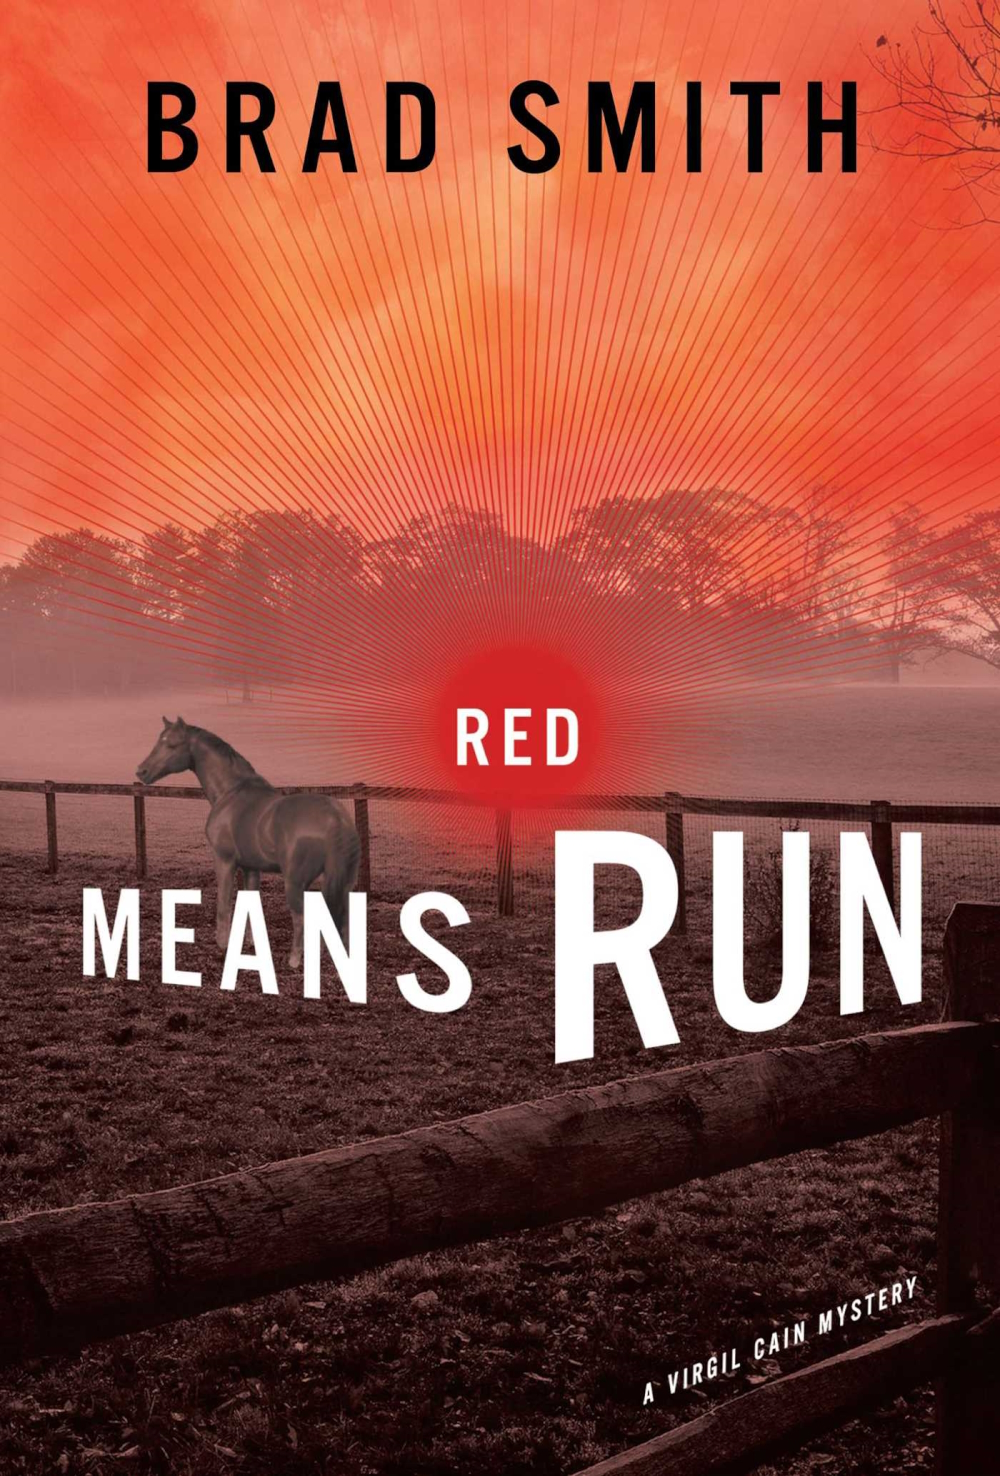 RED MEANS RUN, the first novel in his Virgil Cain series, was named among the Year’s Best Crime Novels by Booklist in 2012.